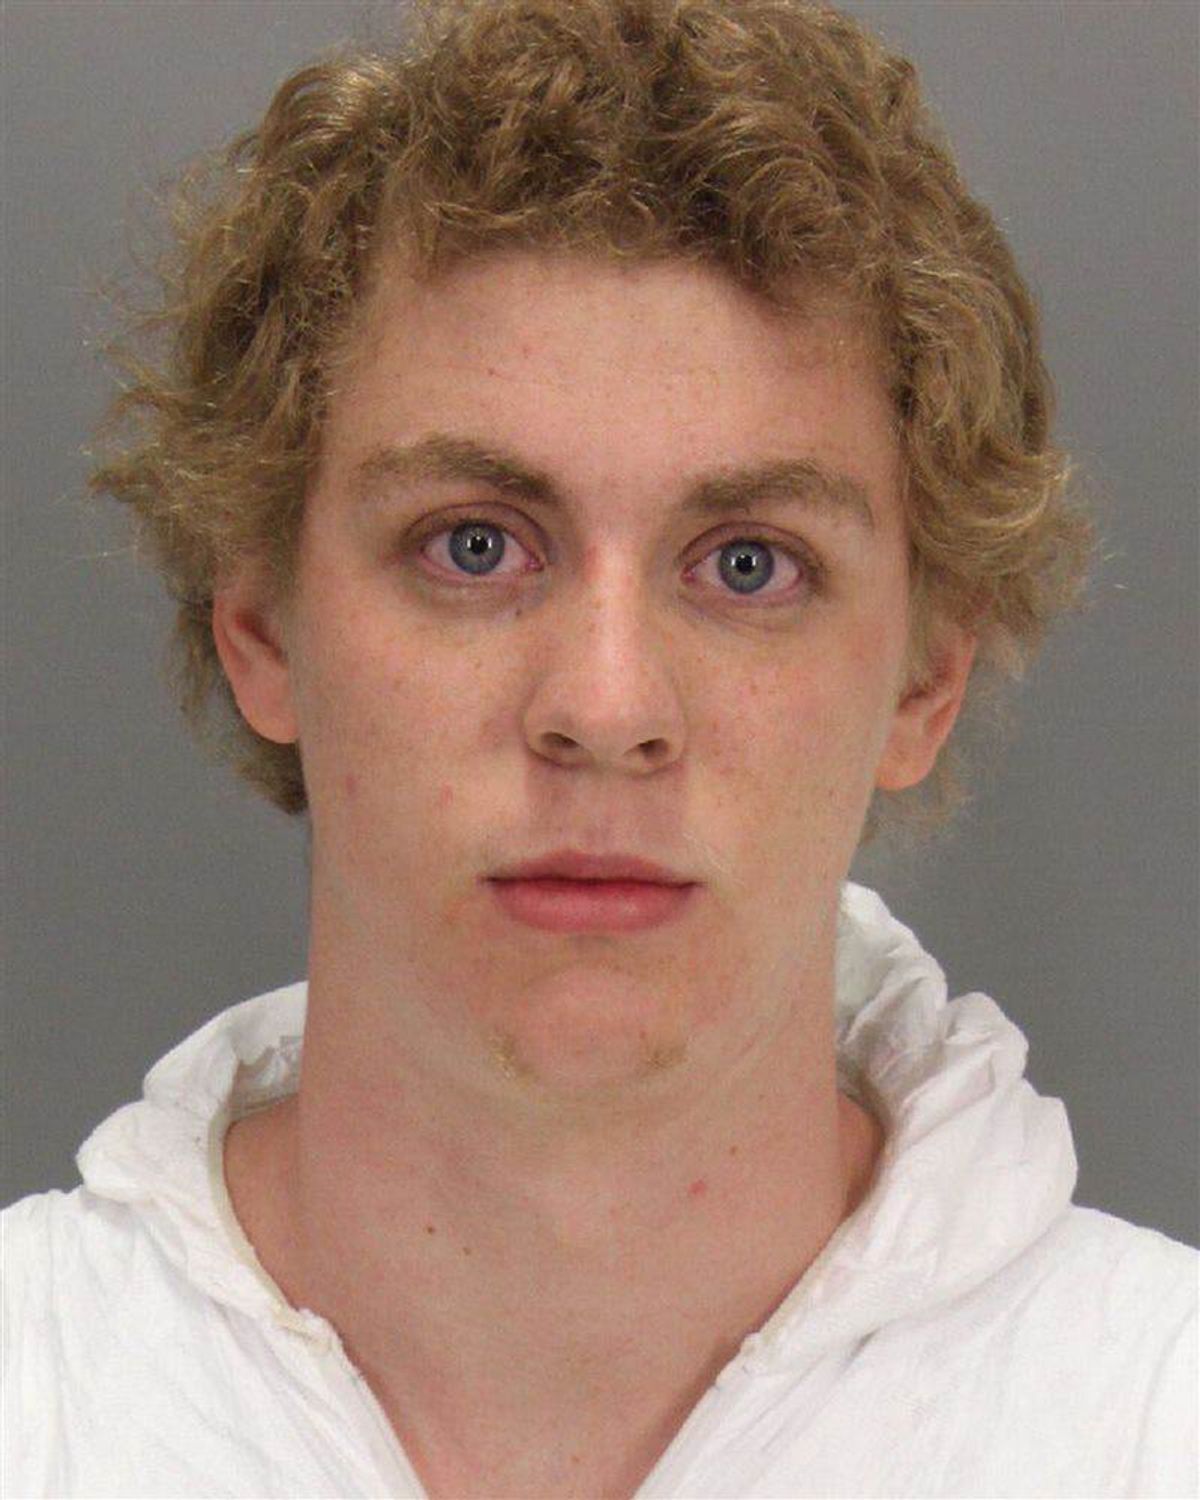 Brock Turner's Freedom Proves Rape Culture Needs To Be Crushed